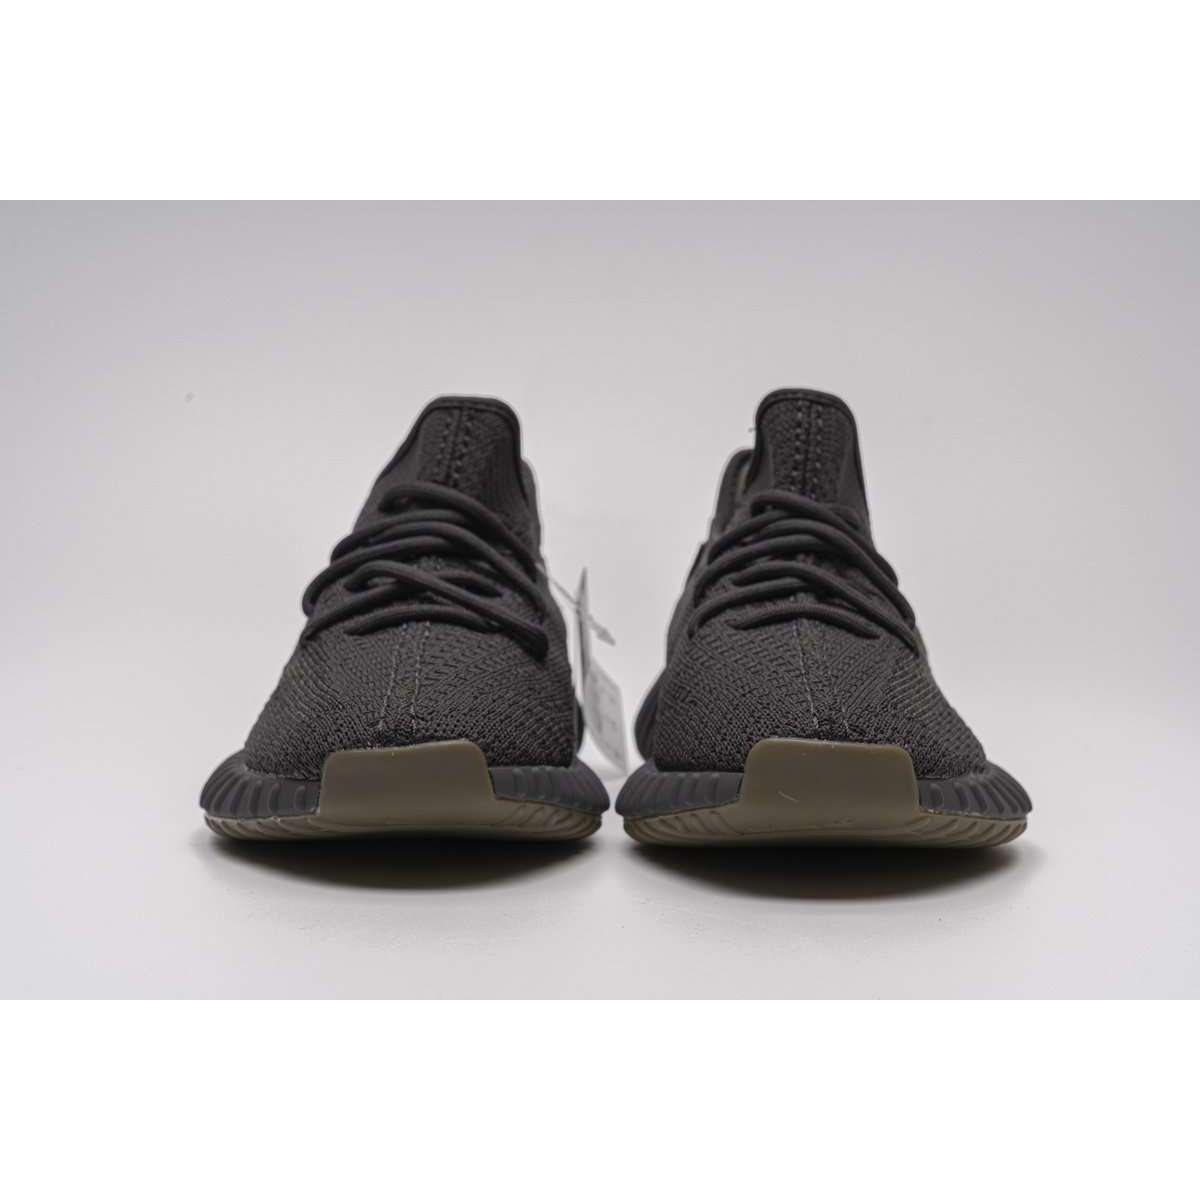 It is difficult to get started at 27cm Sander Adidas general sales YEEZY SLIDE ADULTS input.